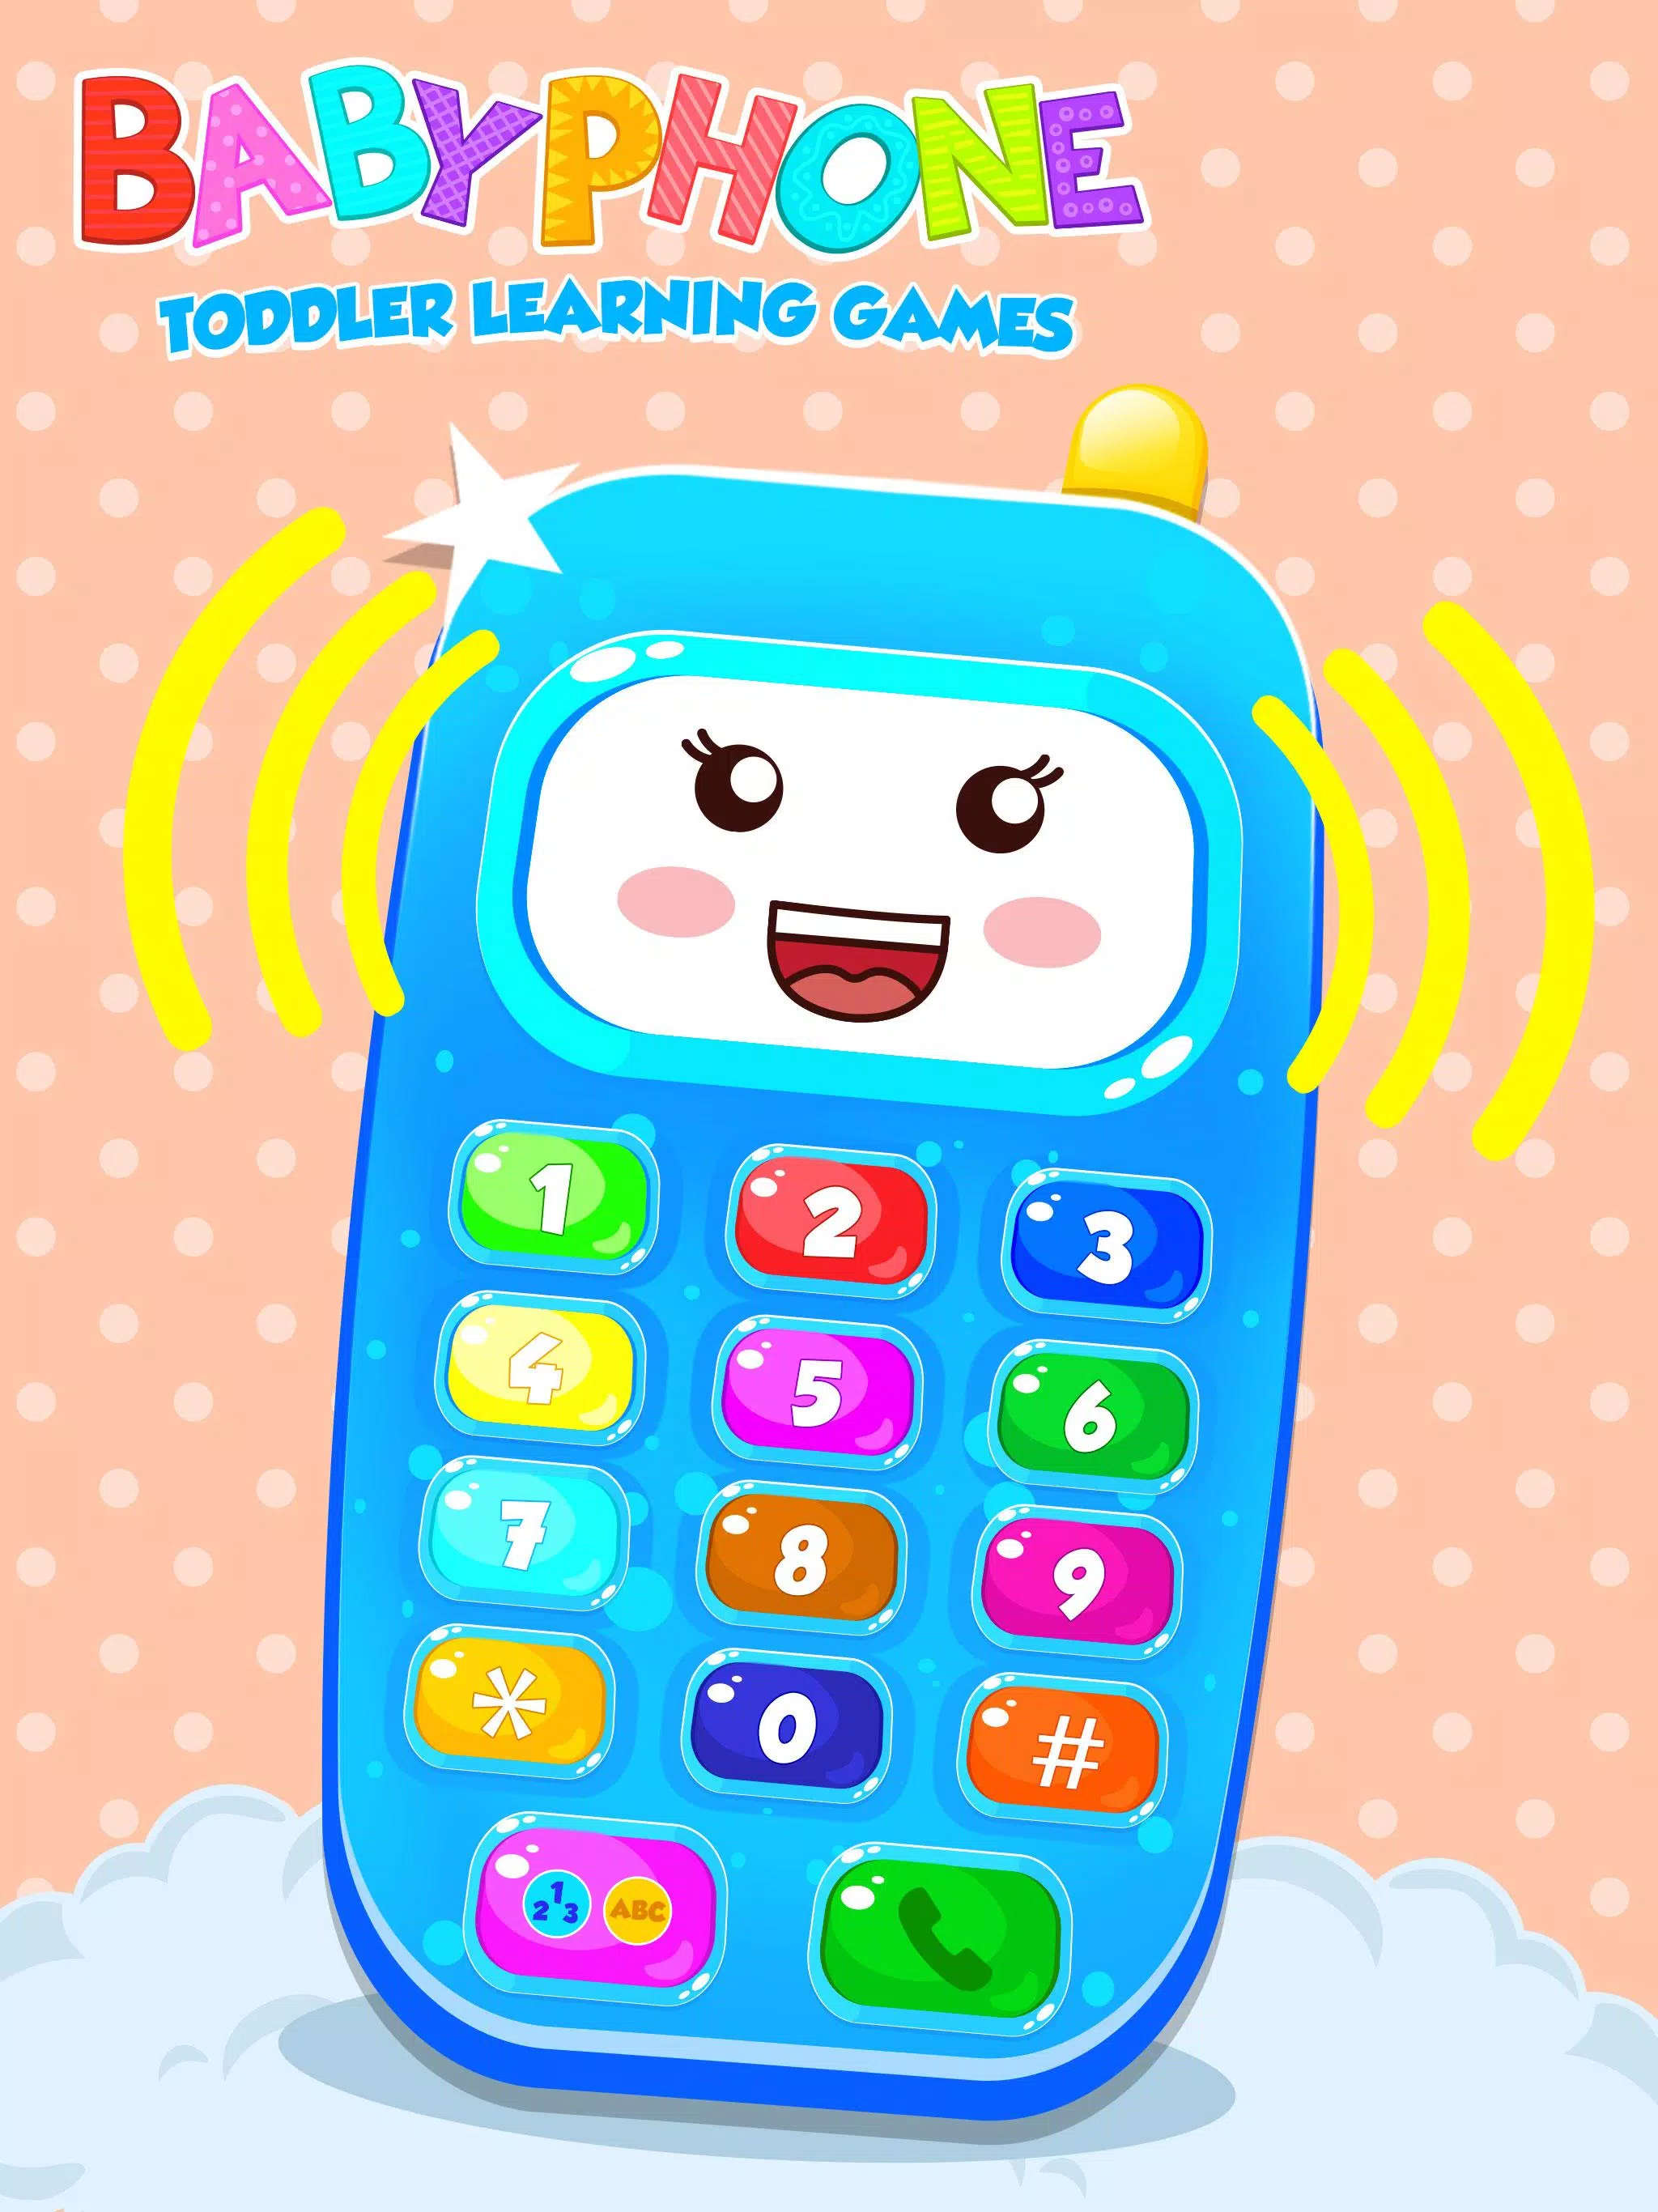 Download Baby Phone Hola Kids Toddlers Free for Android - Baby Phone Hola  Kids Toddlers APK Download 